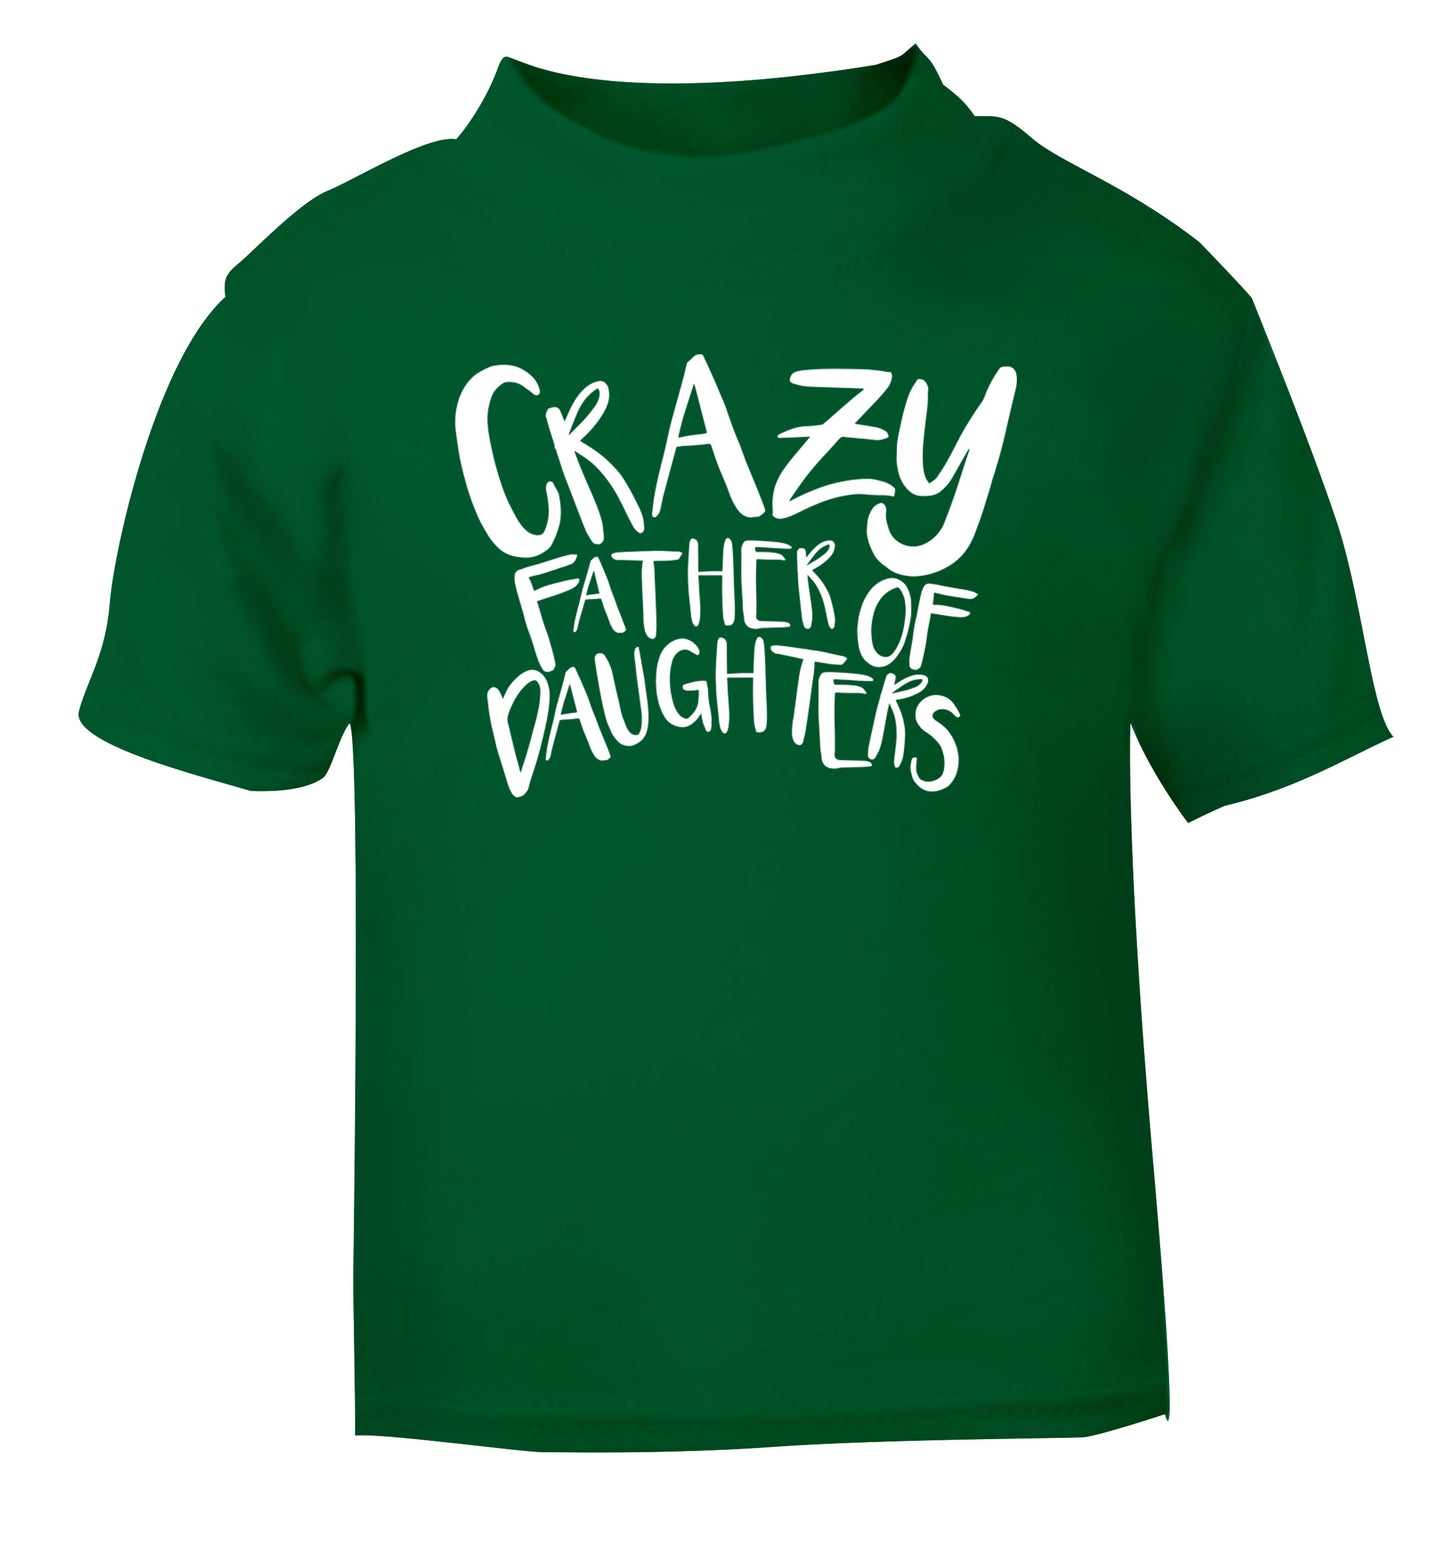 Crazy father of daughters green Baby Toddler Tshirt 2 Years